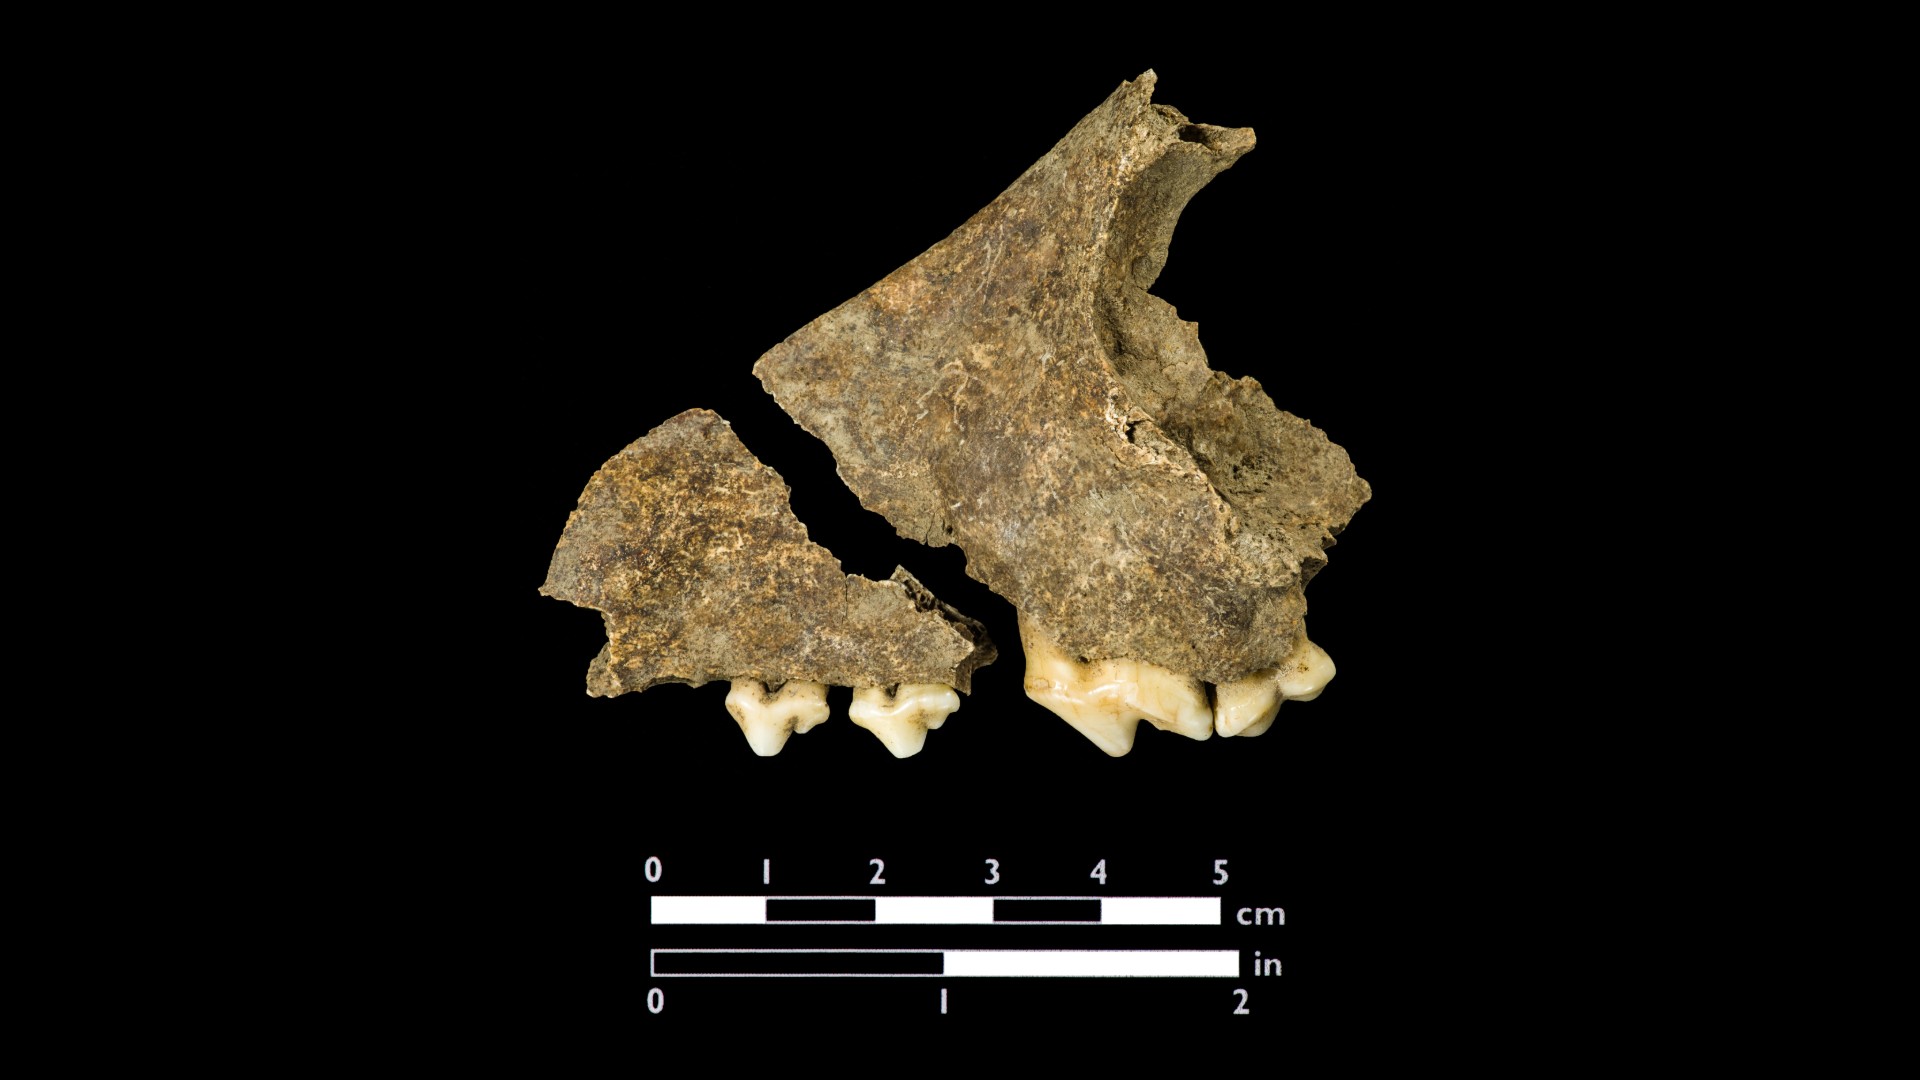 Researchers were able to get DNA from this dog bone, revealing that, at least on its mothers side, this dog was of indigenous North American ancestry. Photo courtesy Jamestown Rediscovery Foundation (Preservation Virginia)